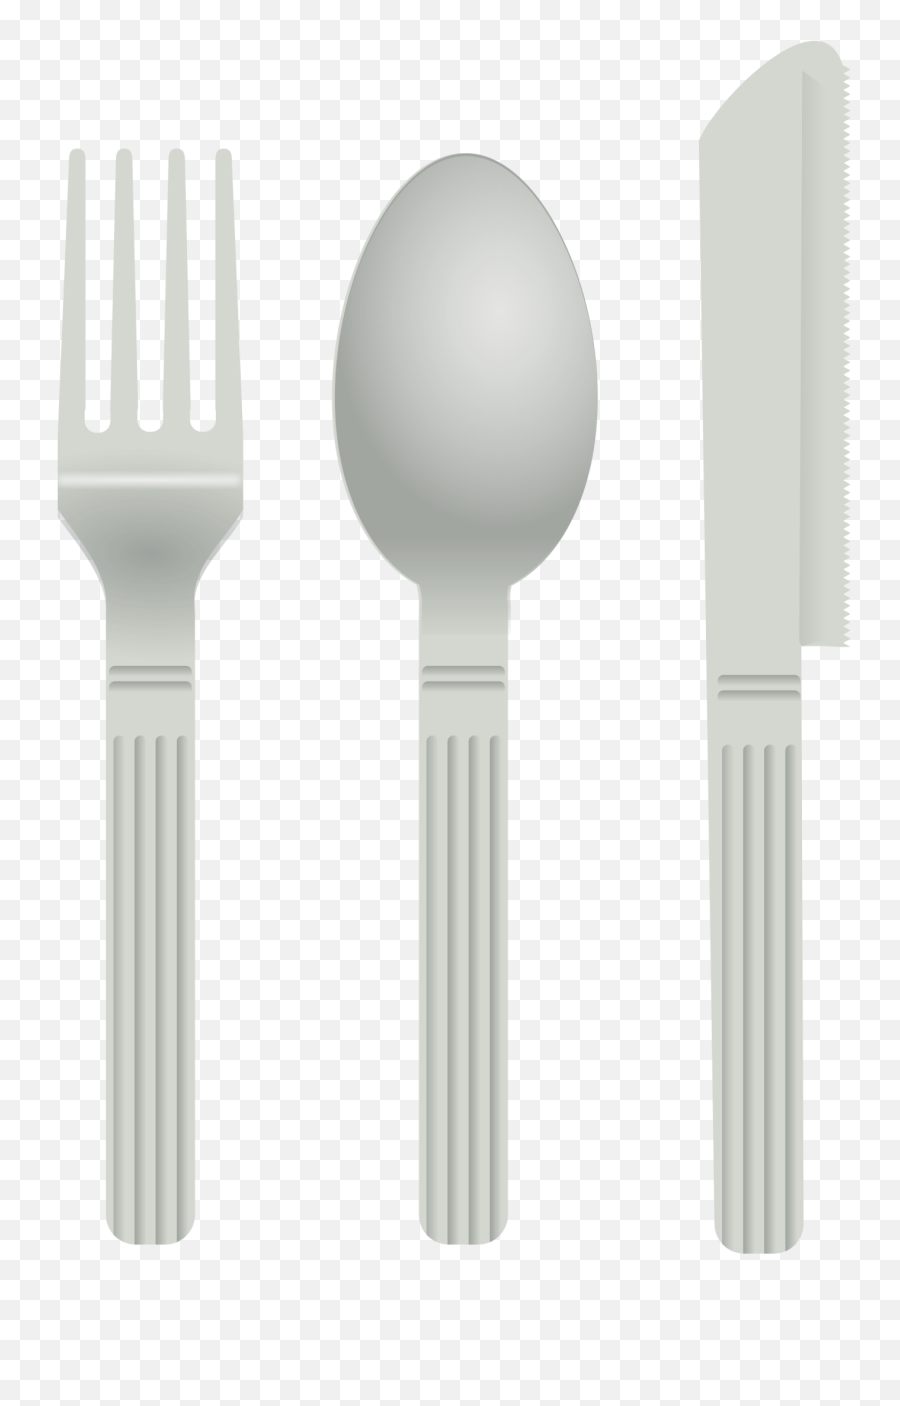 Fork Clipart Png In This 3 Piece Svg And - Fork,Minecraft Spoon Icon